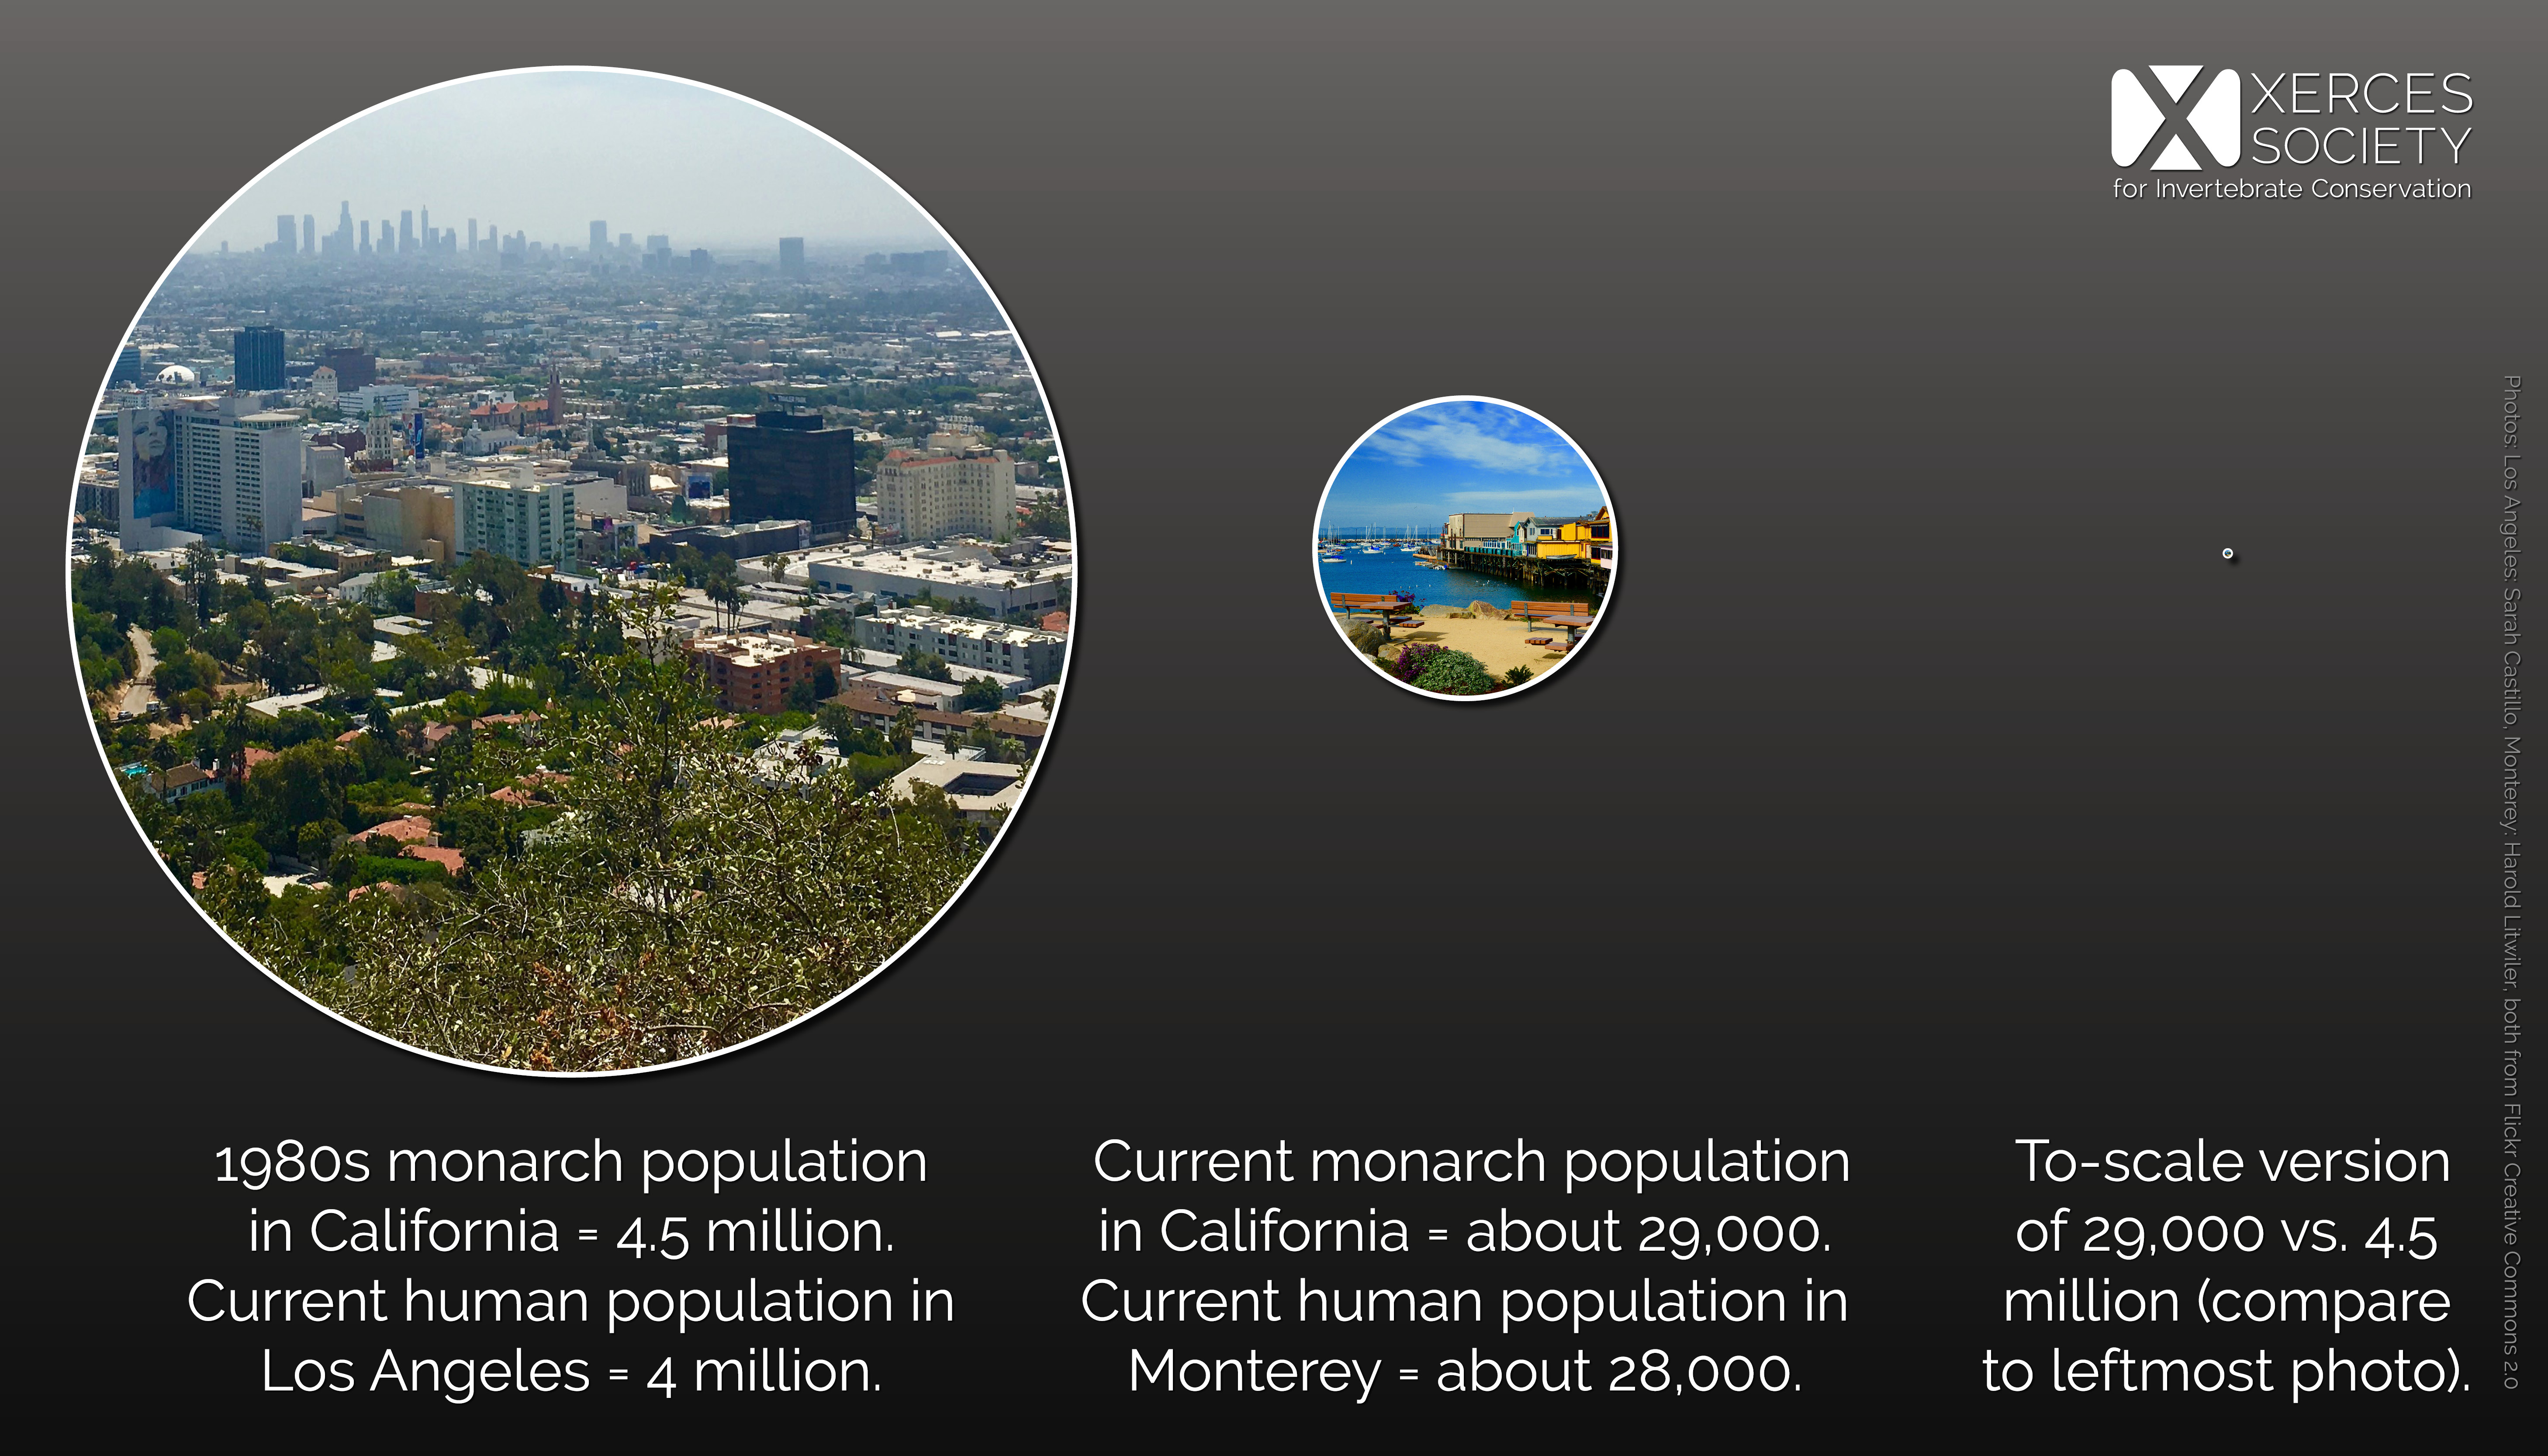 This infographic shows three circles, getting smaller as they progress from the left to the right. The leftmost circle contains an aerial photo of Los Angeles. The center circle, which is approximately half the size of the first, contains a photo of the Monterey waterfront. The rightmost circle is essentially a speck; it is 1/160th the size of the leftmost circle. This demonstrates the variation in population size from LA to Monterey, and draws the comparison between the size of the western monarch population in the 1980s and its size today.